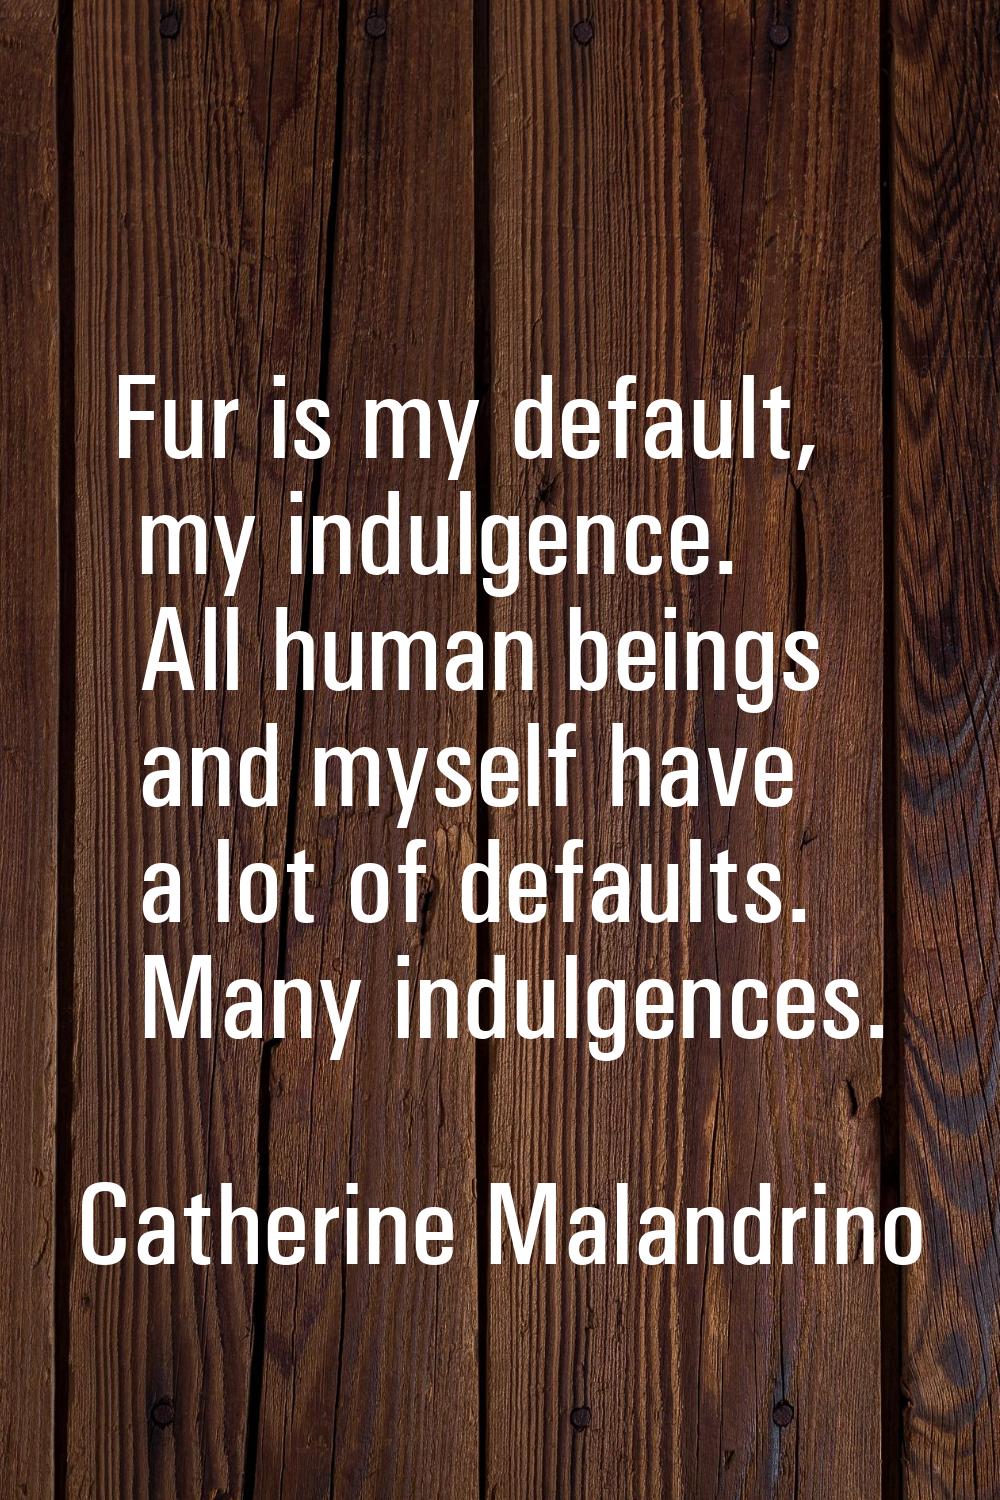 Fur is my default, my indulgence. All human beings and myself have a lot of defaults. Many indulgen